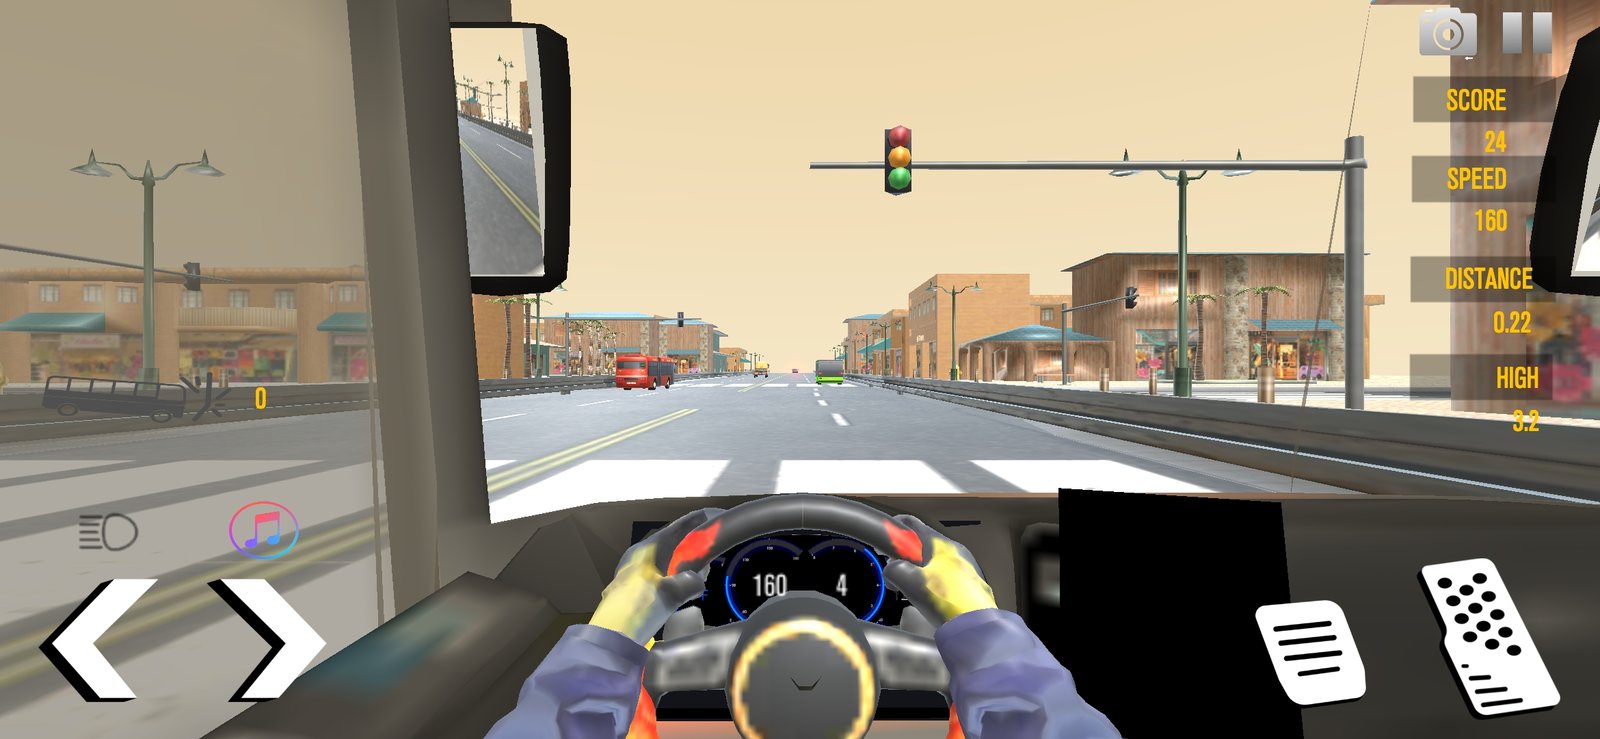 Merge Cyber Car: Highway Racer Mod apk [Unlimited money] download - Merge  Cyber Car: Highway Racer MOD apk 2.26.3 free for Android.